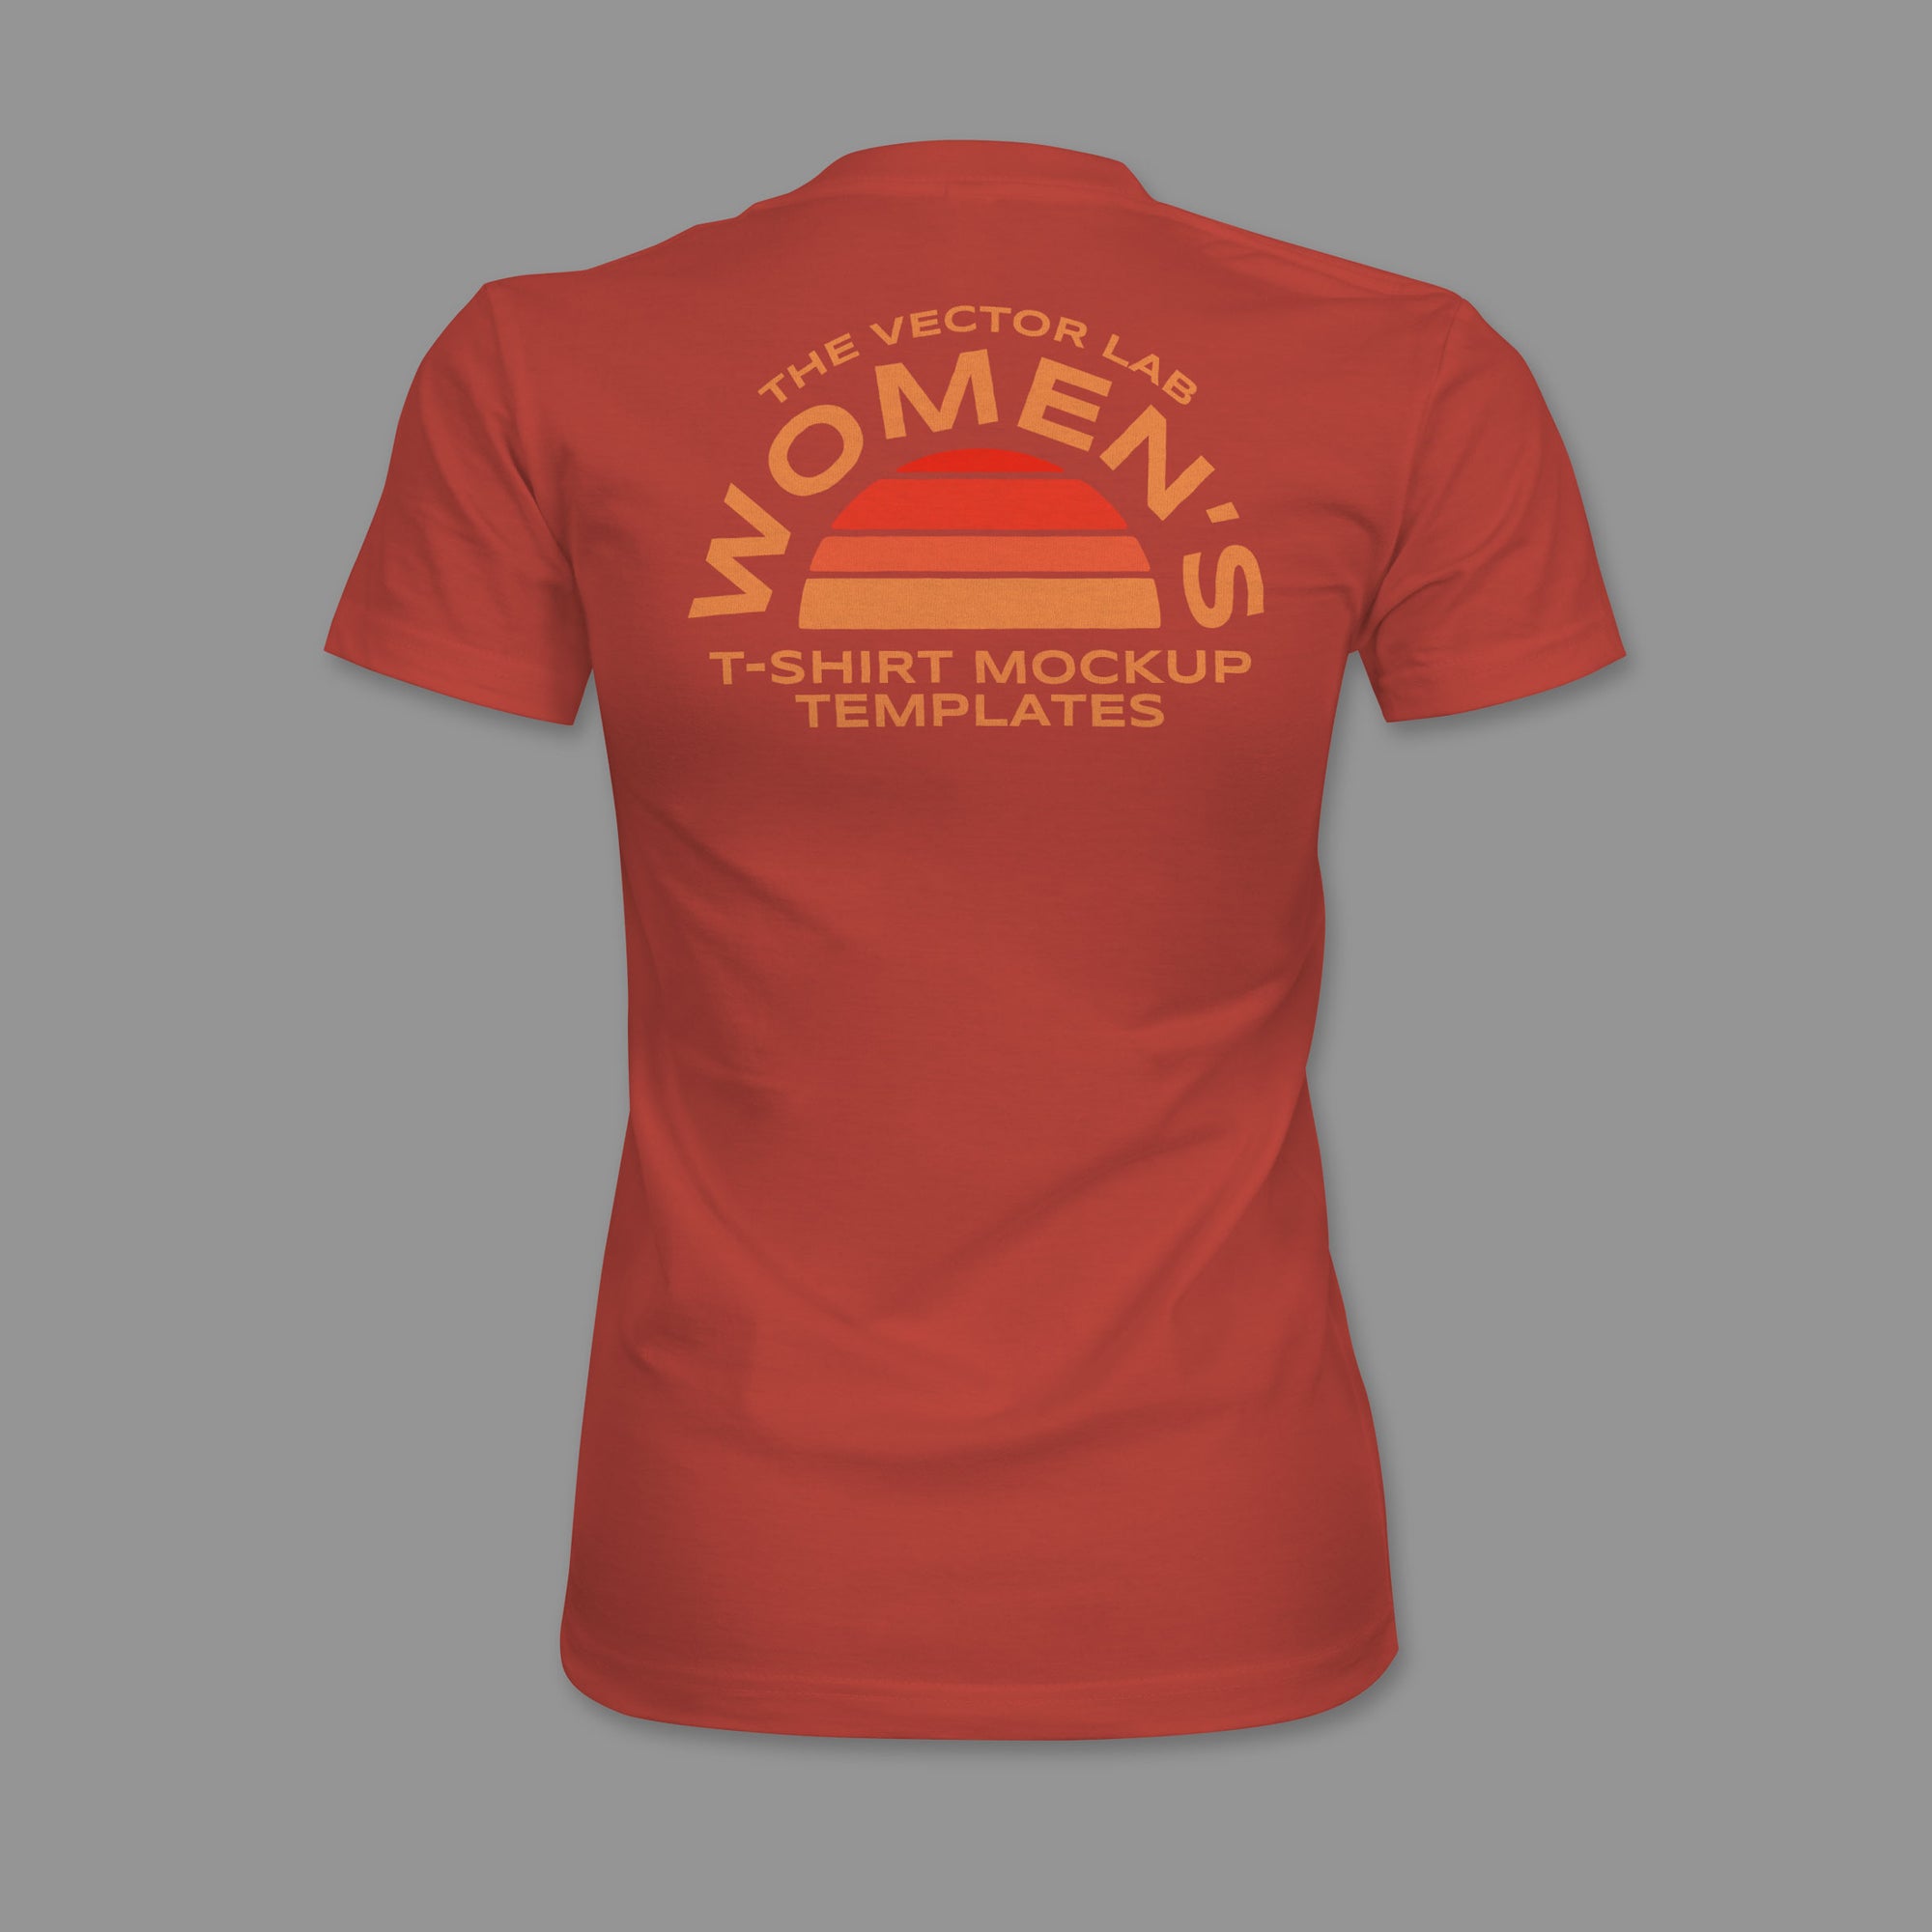 Download Women's T-Shirt Mockup Templates - TheVectorLab